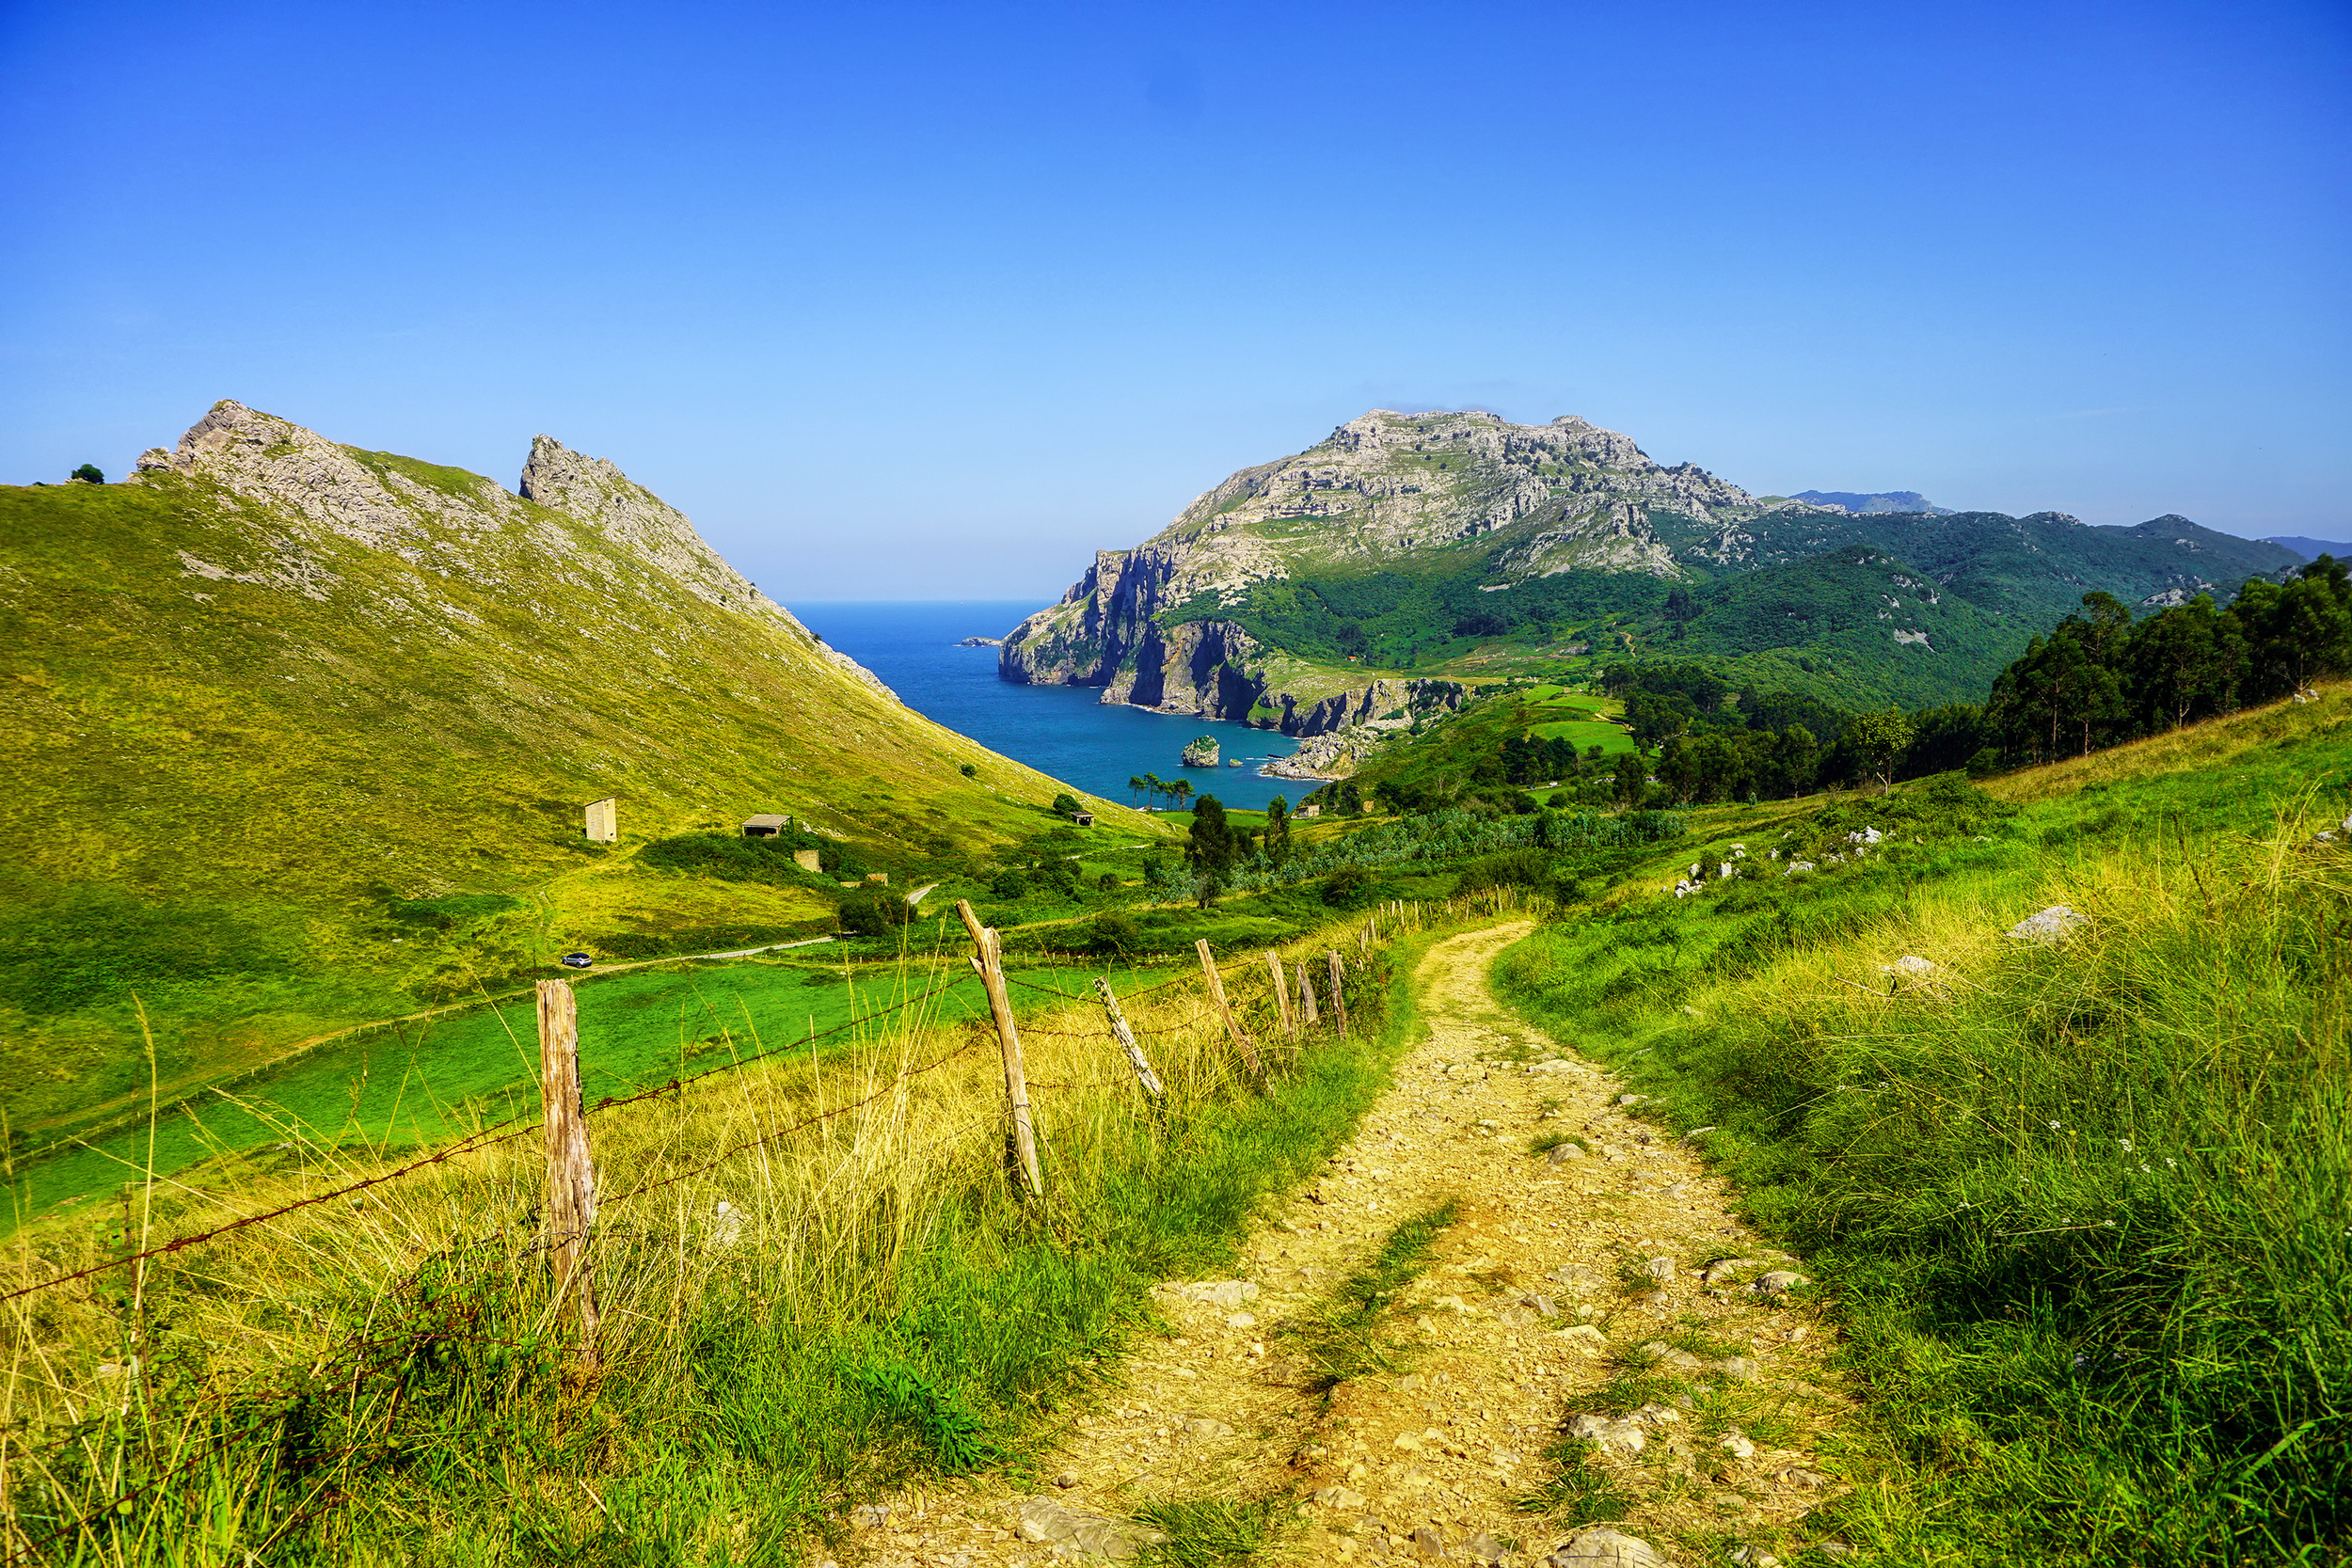 <p>This unique part of the country has spectacular natural beauty. It's famously home to the Camino de Santiago, the ancient pilgrimage walk that numerous travelers now partake in every year. The full route includes sections in Portugal and France, but the best views are in Spain!</p><p><a href='https://www.msn.com/en-us/community/channel/vid-cj9pqbr0vn9in2b6ddcd8sfgpfq6x6utp44fssrv6mc2gtybw0us'>Follow us on MSN to see more of our exclusive lifestyle content.</a></p>